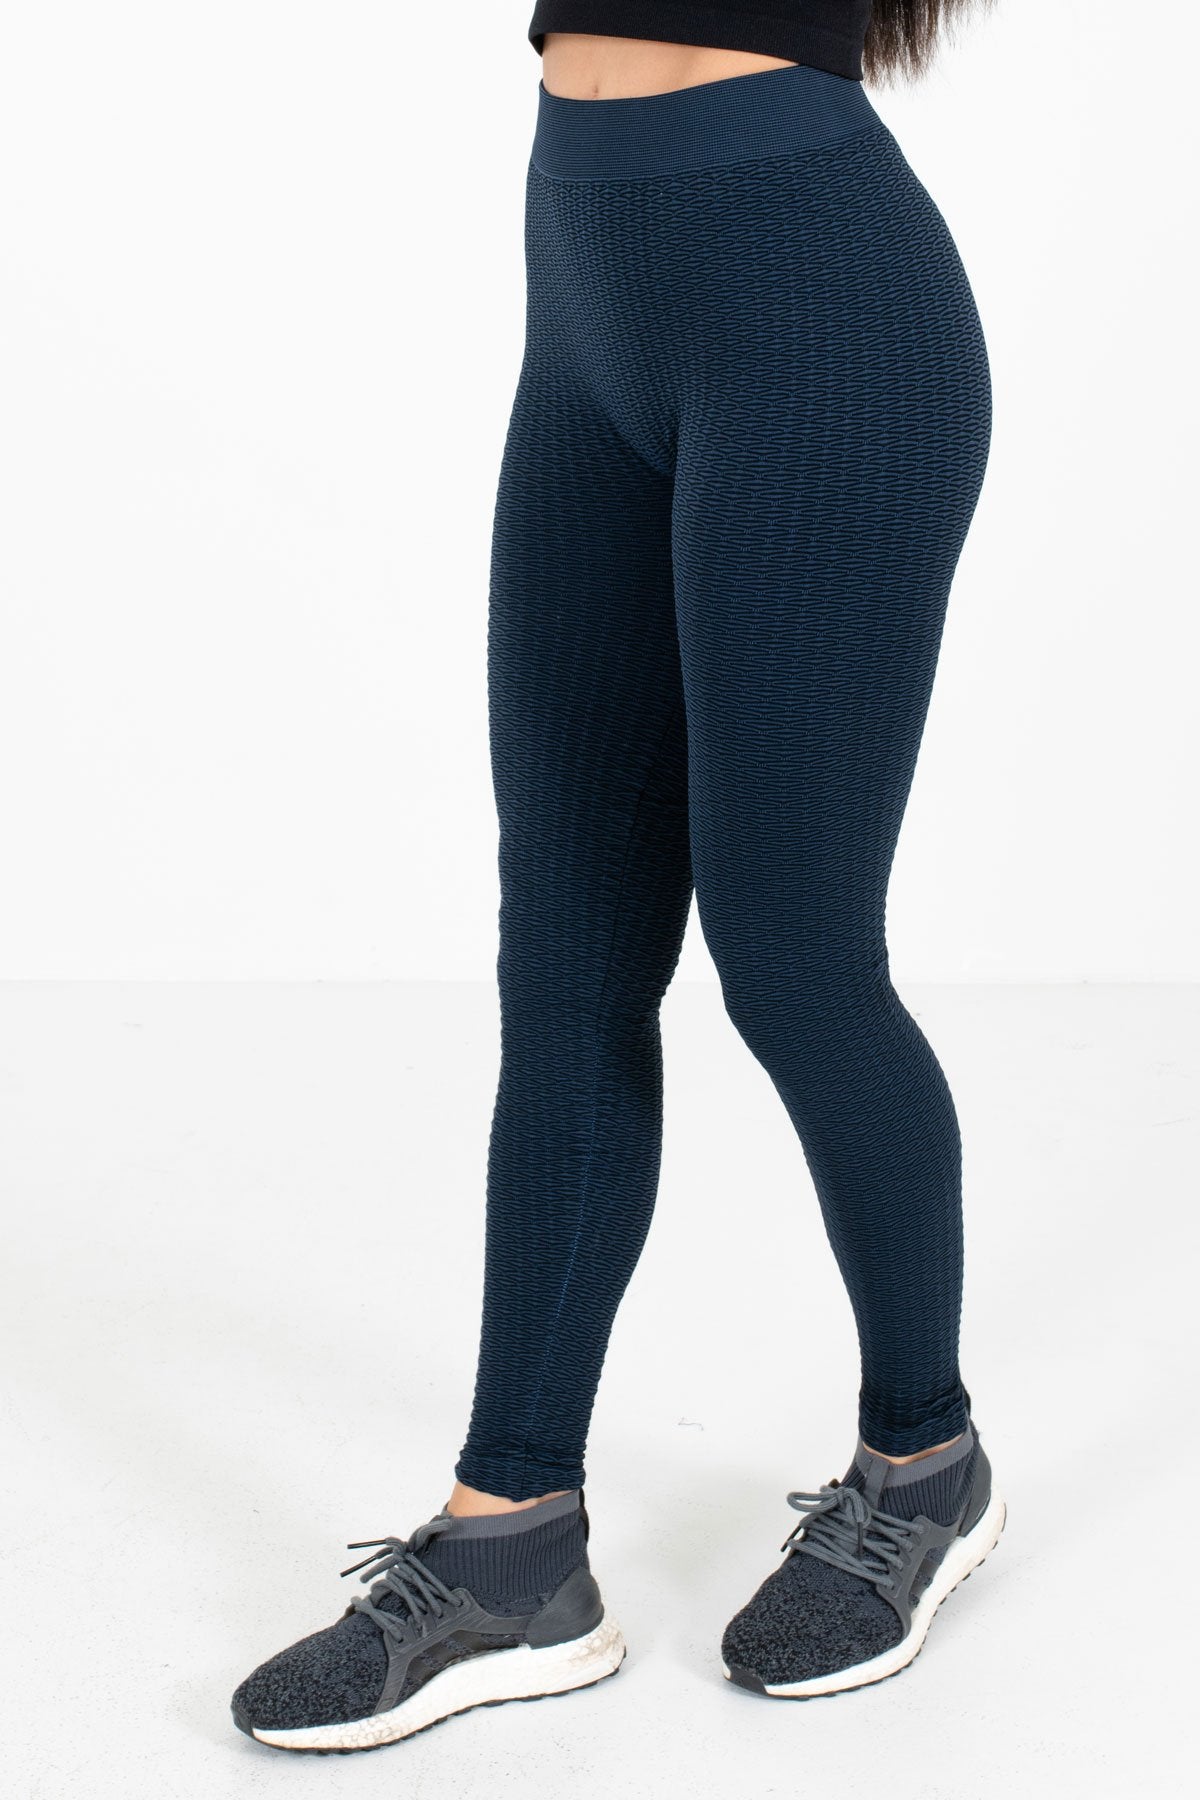 Navy High-Waisted Style Boutique Active Leggings for Women